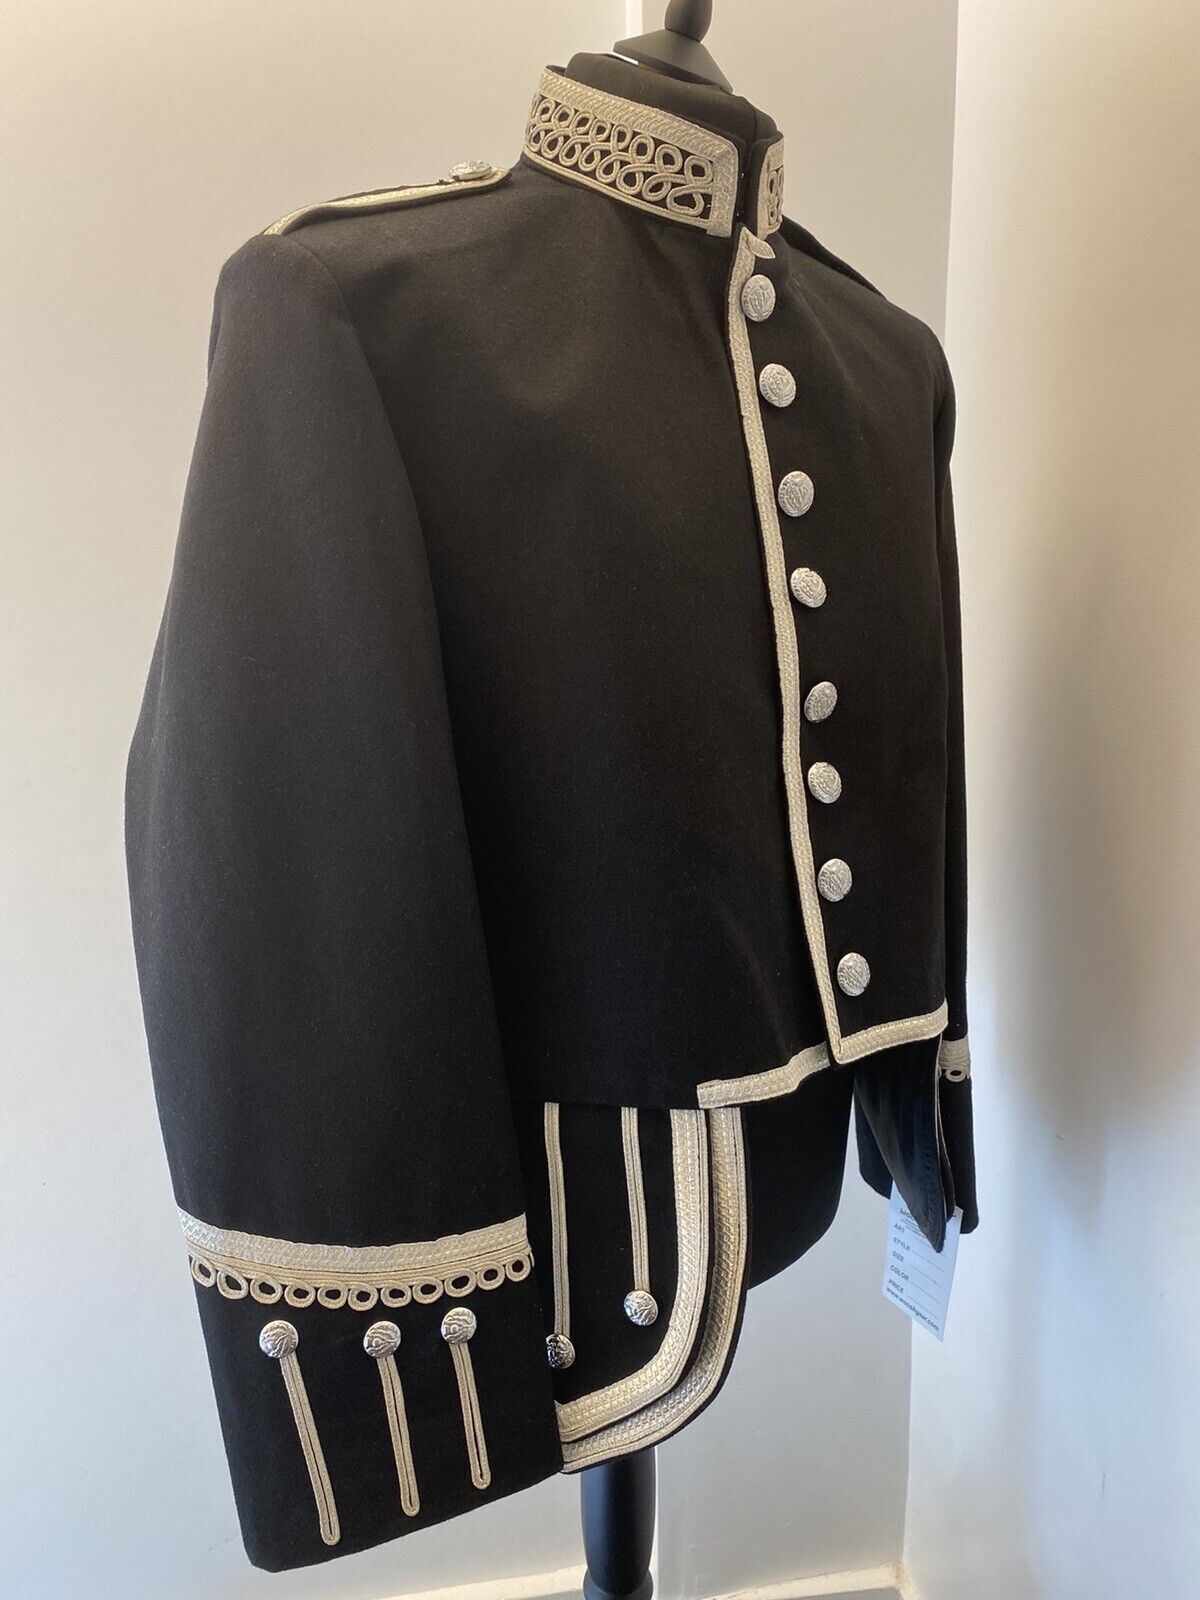 Doublat Tunic Miltary piper & Drummer Jacket wool Black & Silver.